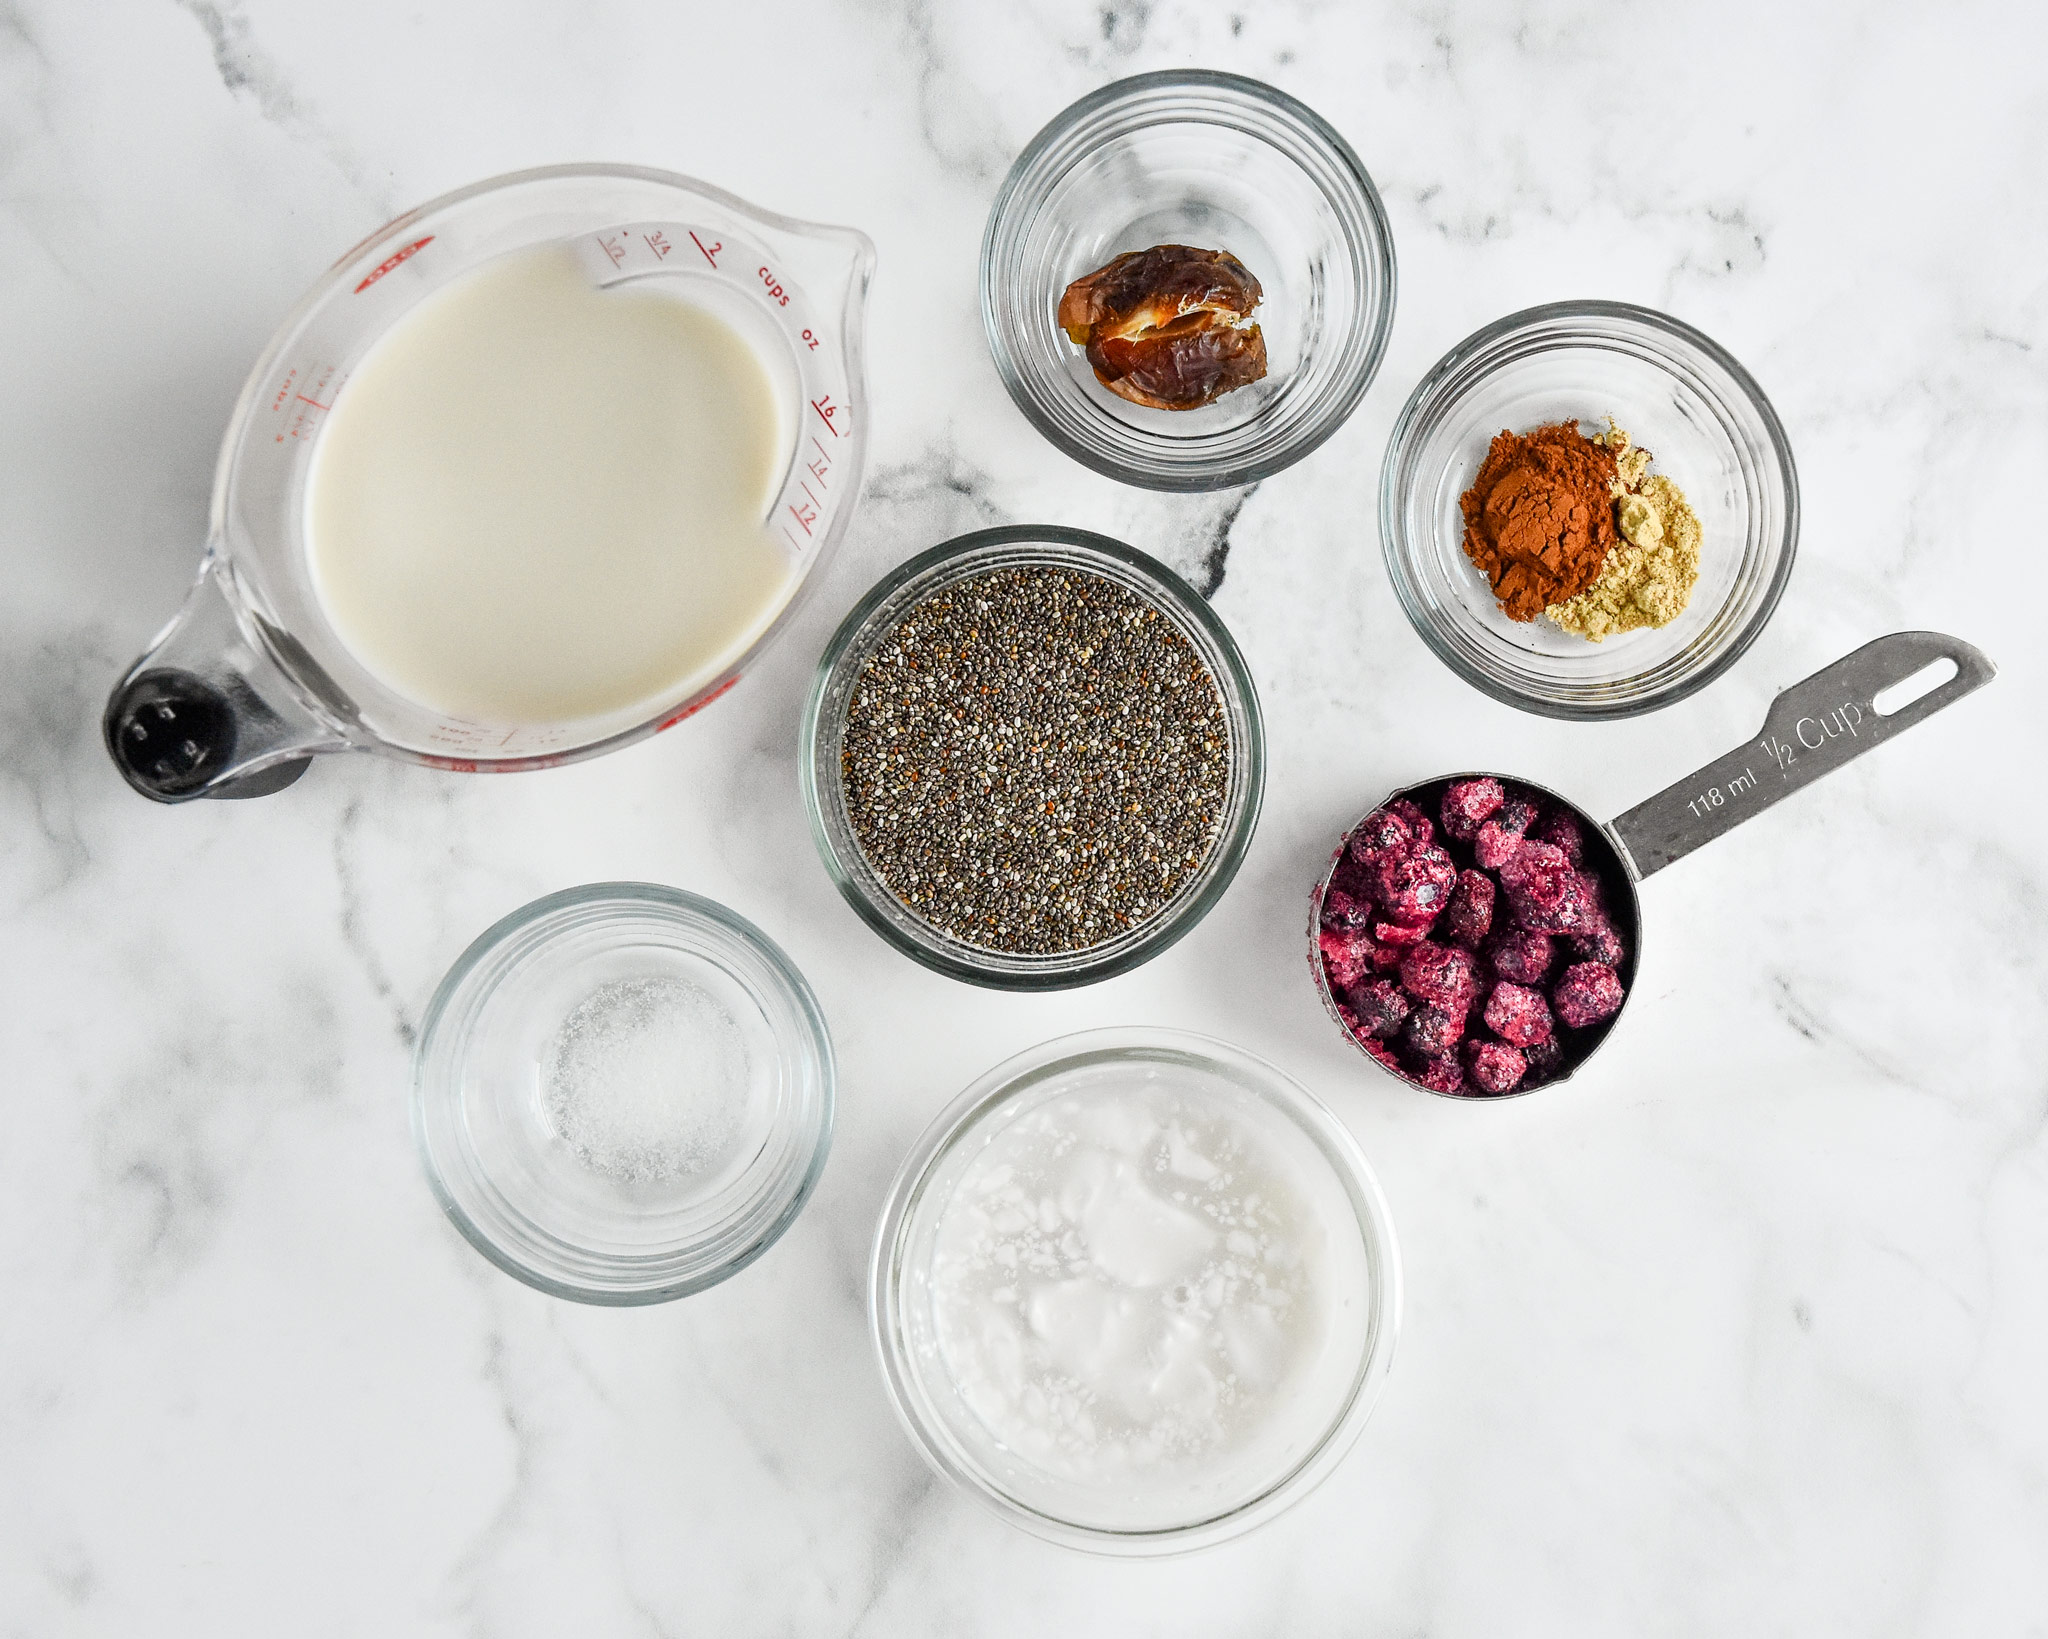 ingredients in the blueberry spice chia pudding